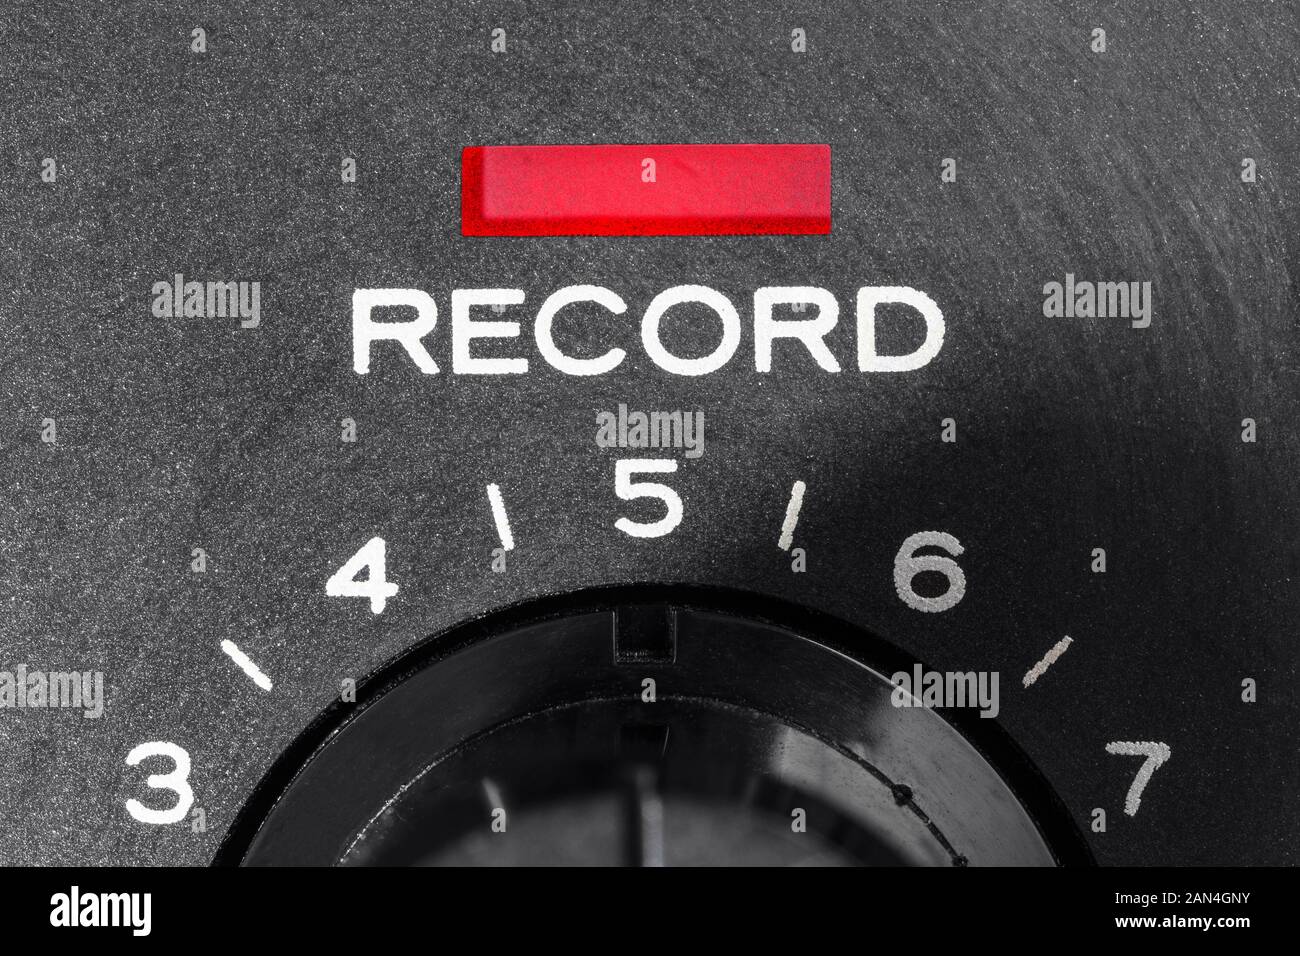 Macro close up photograph of vintage tape machine record control dial and indicator light. Stock Photo